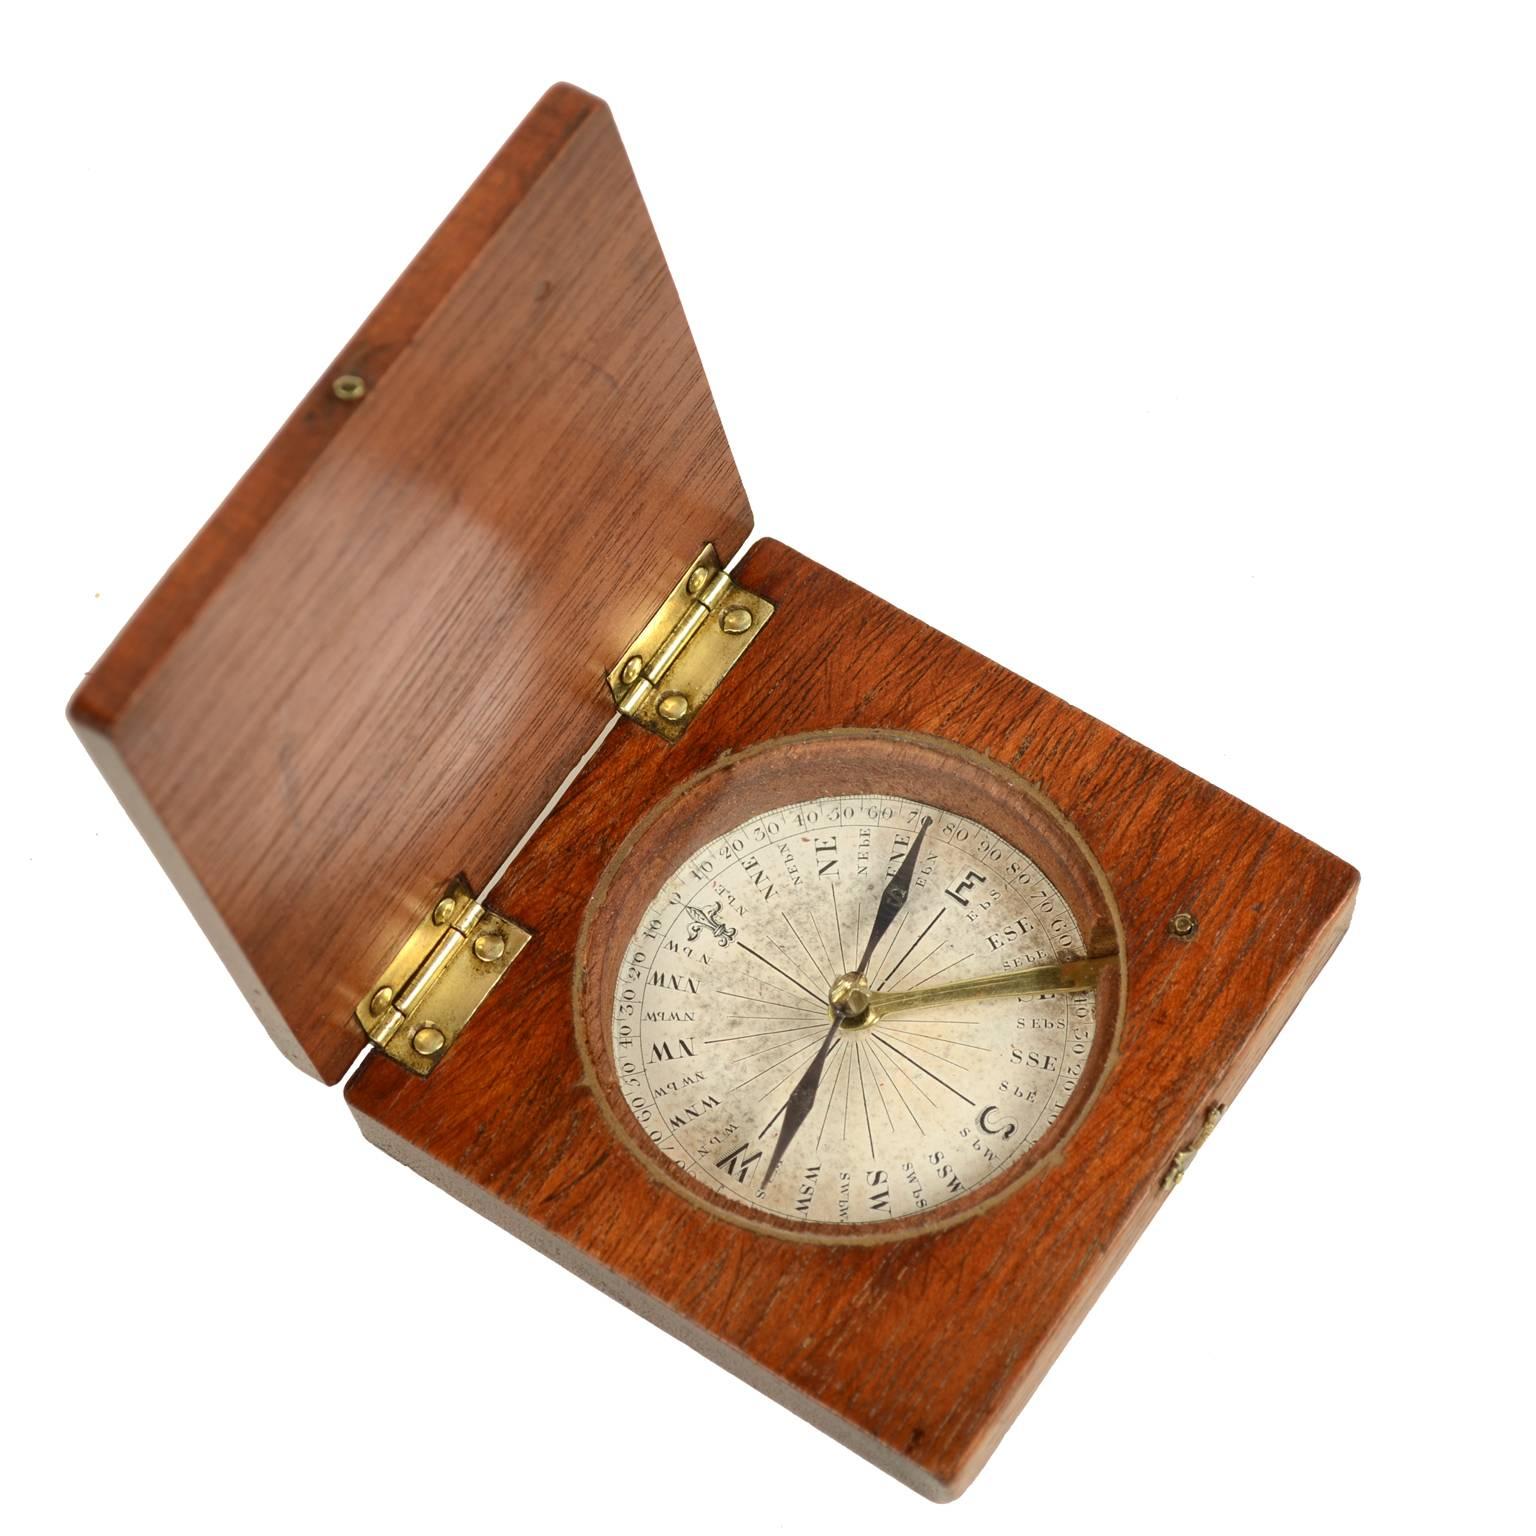 Small pocket compass, mahogany and brass, compass card with 32 winds with goniometric circle on printed paper and block of needle for the calculation of horizontal angles. Very good condition and working perfectly. Cm 7.5x7.3x2 (h). Shipping insured